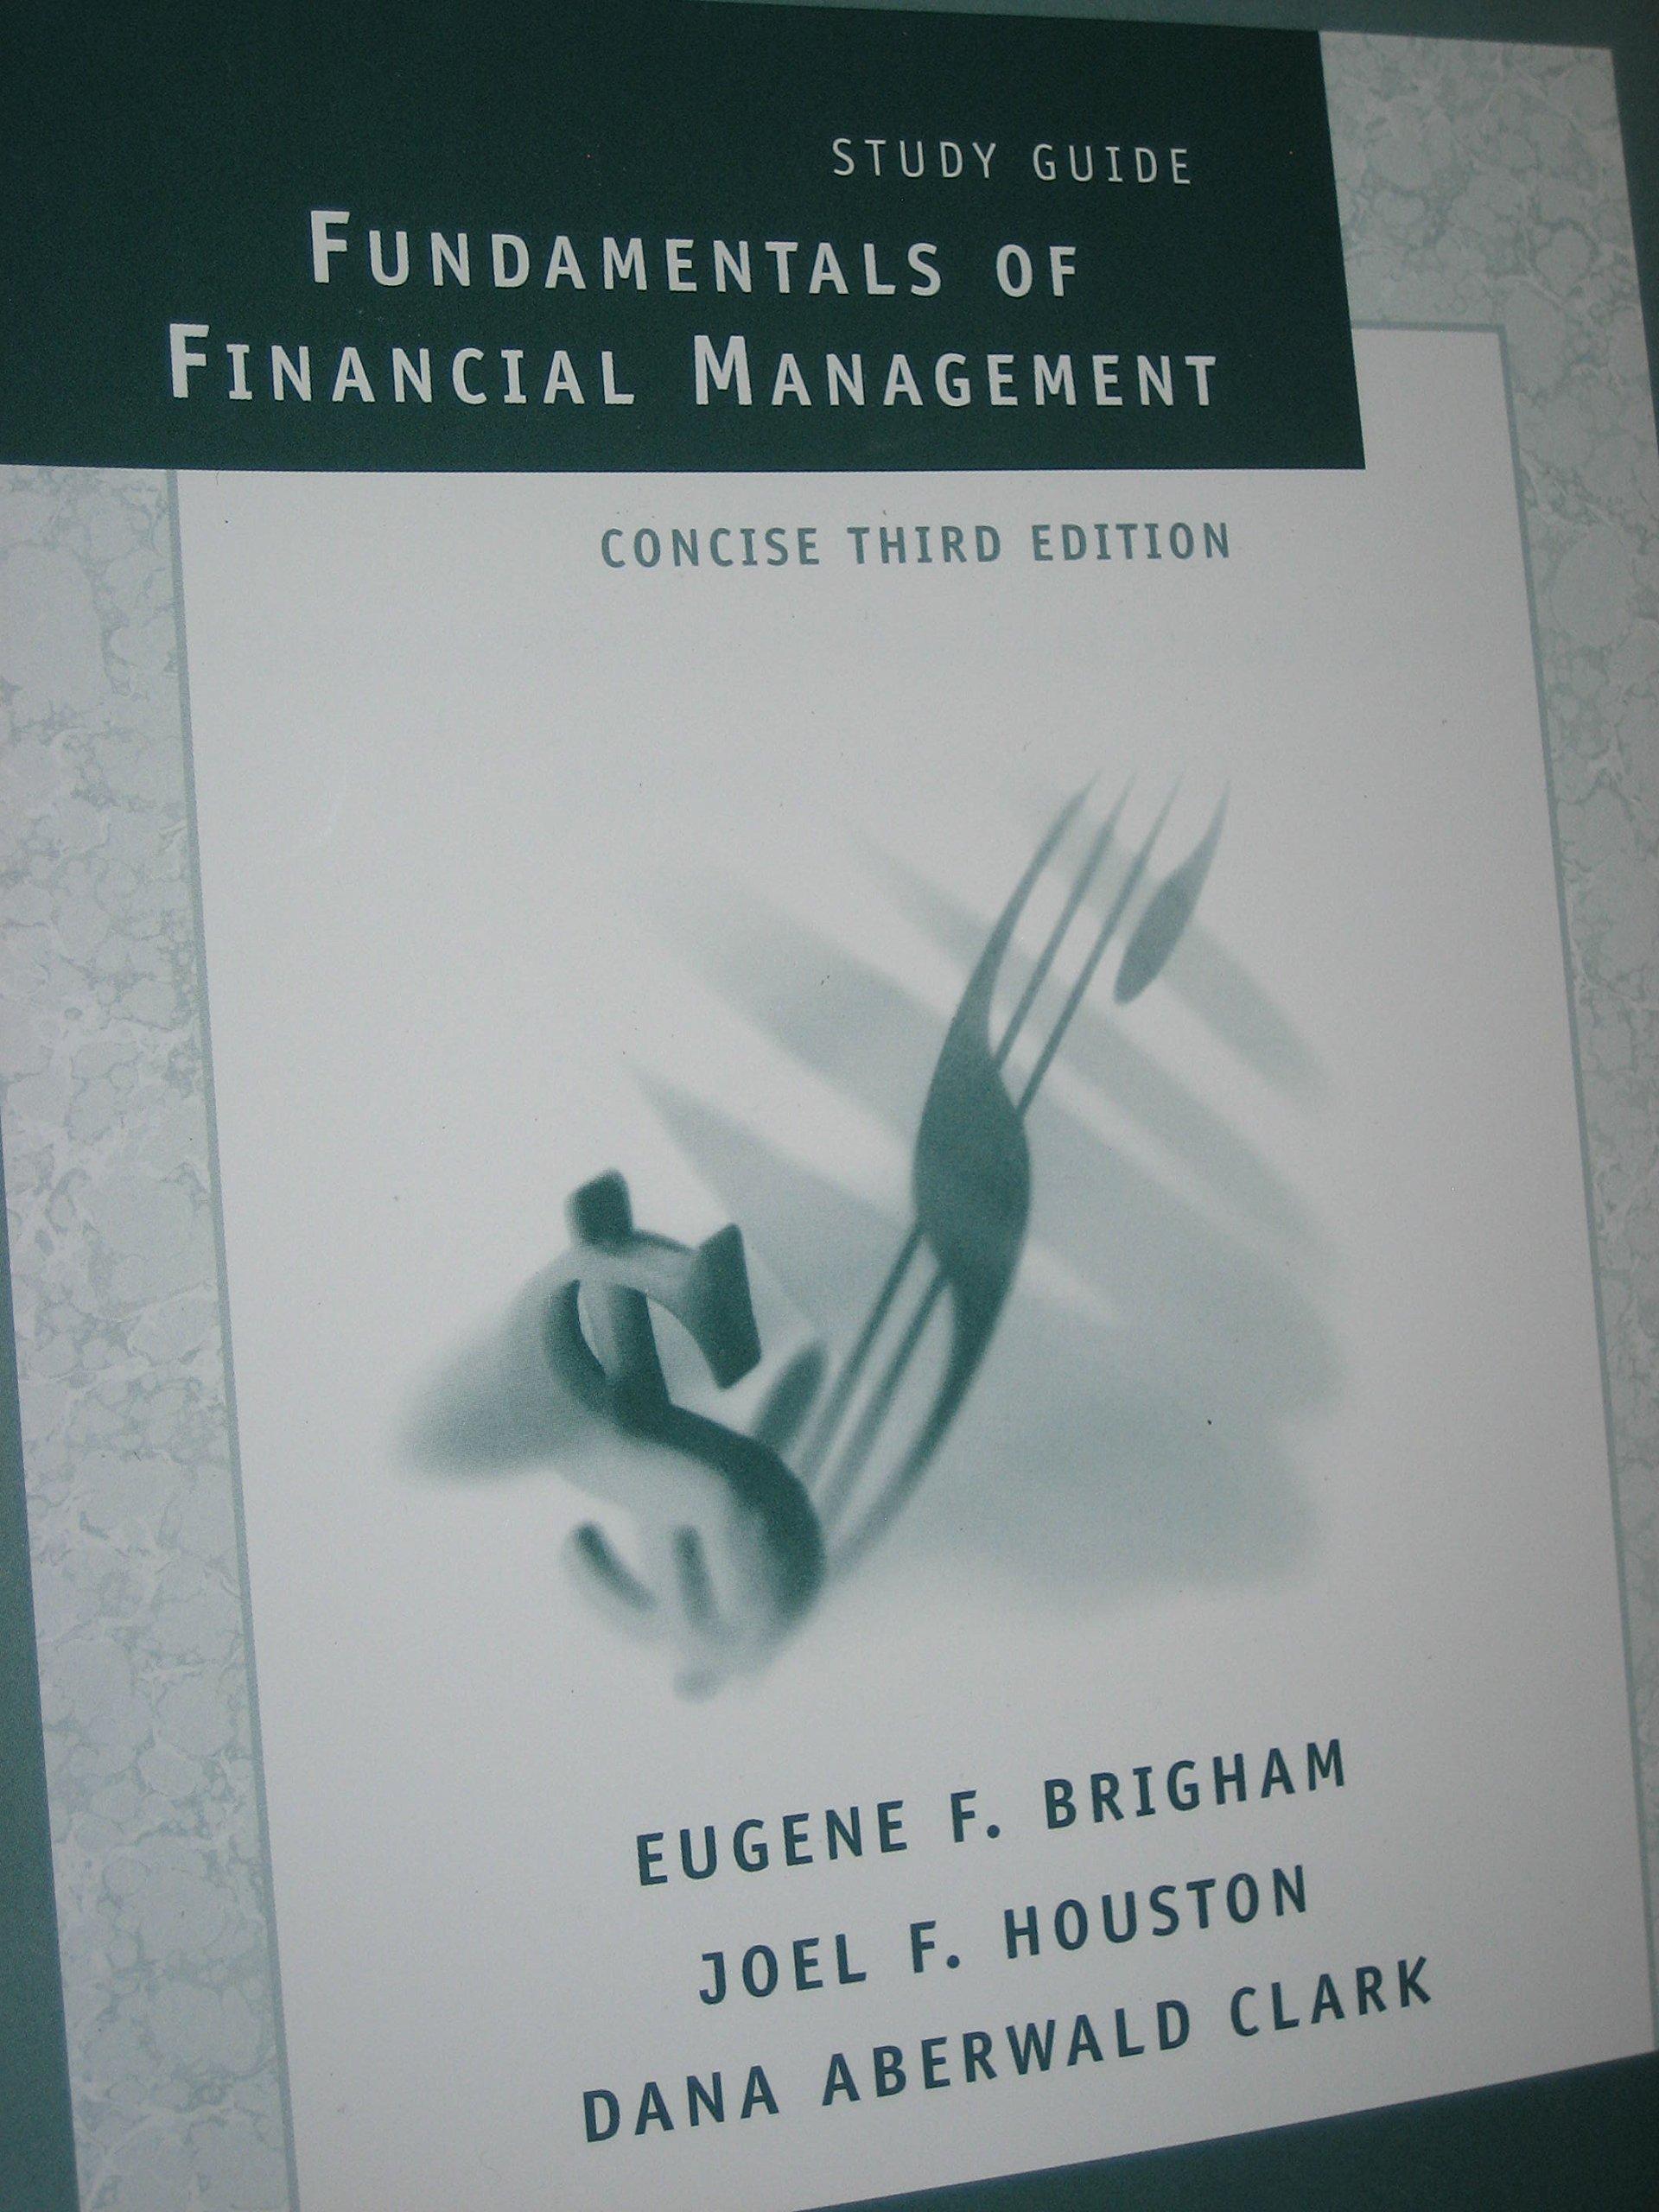 study guide to accompany fundamentals of financial management 3rd concise edition eugene f. brigham, joel f.